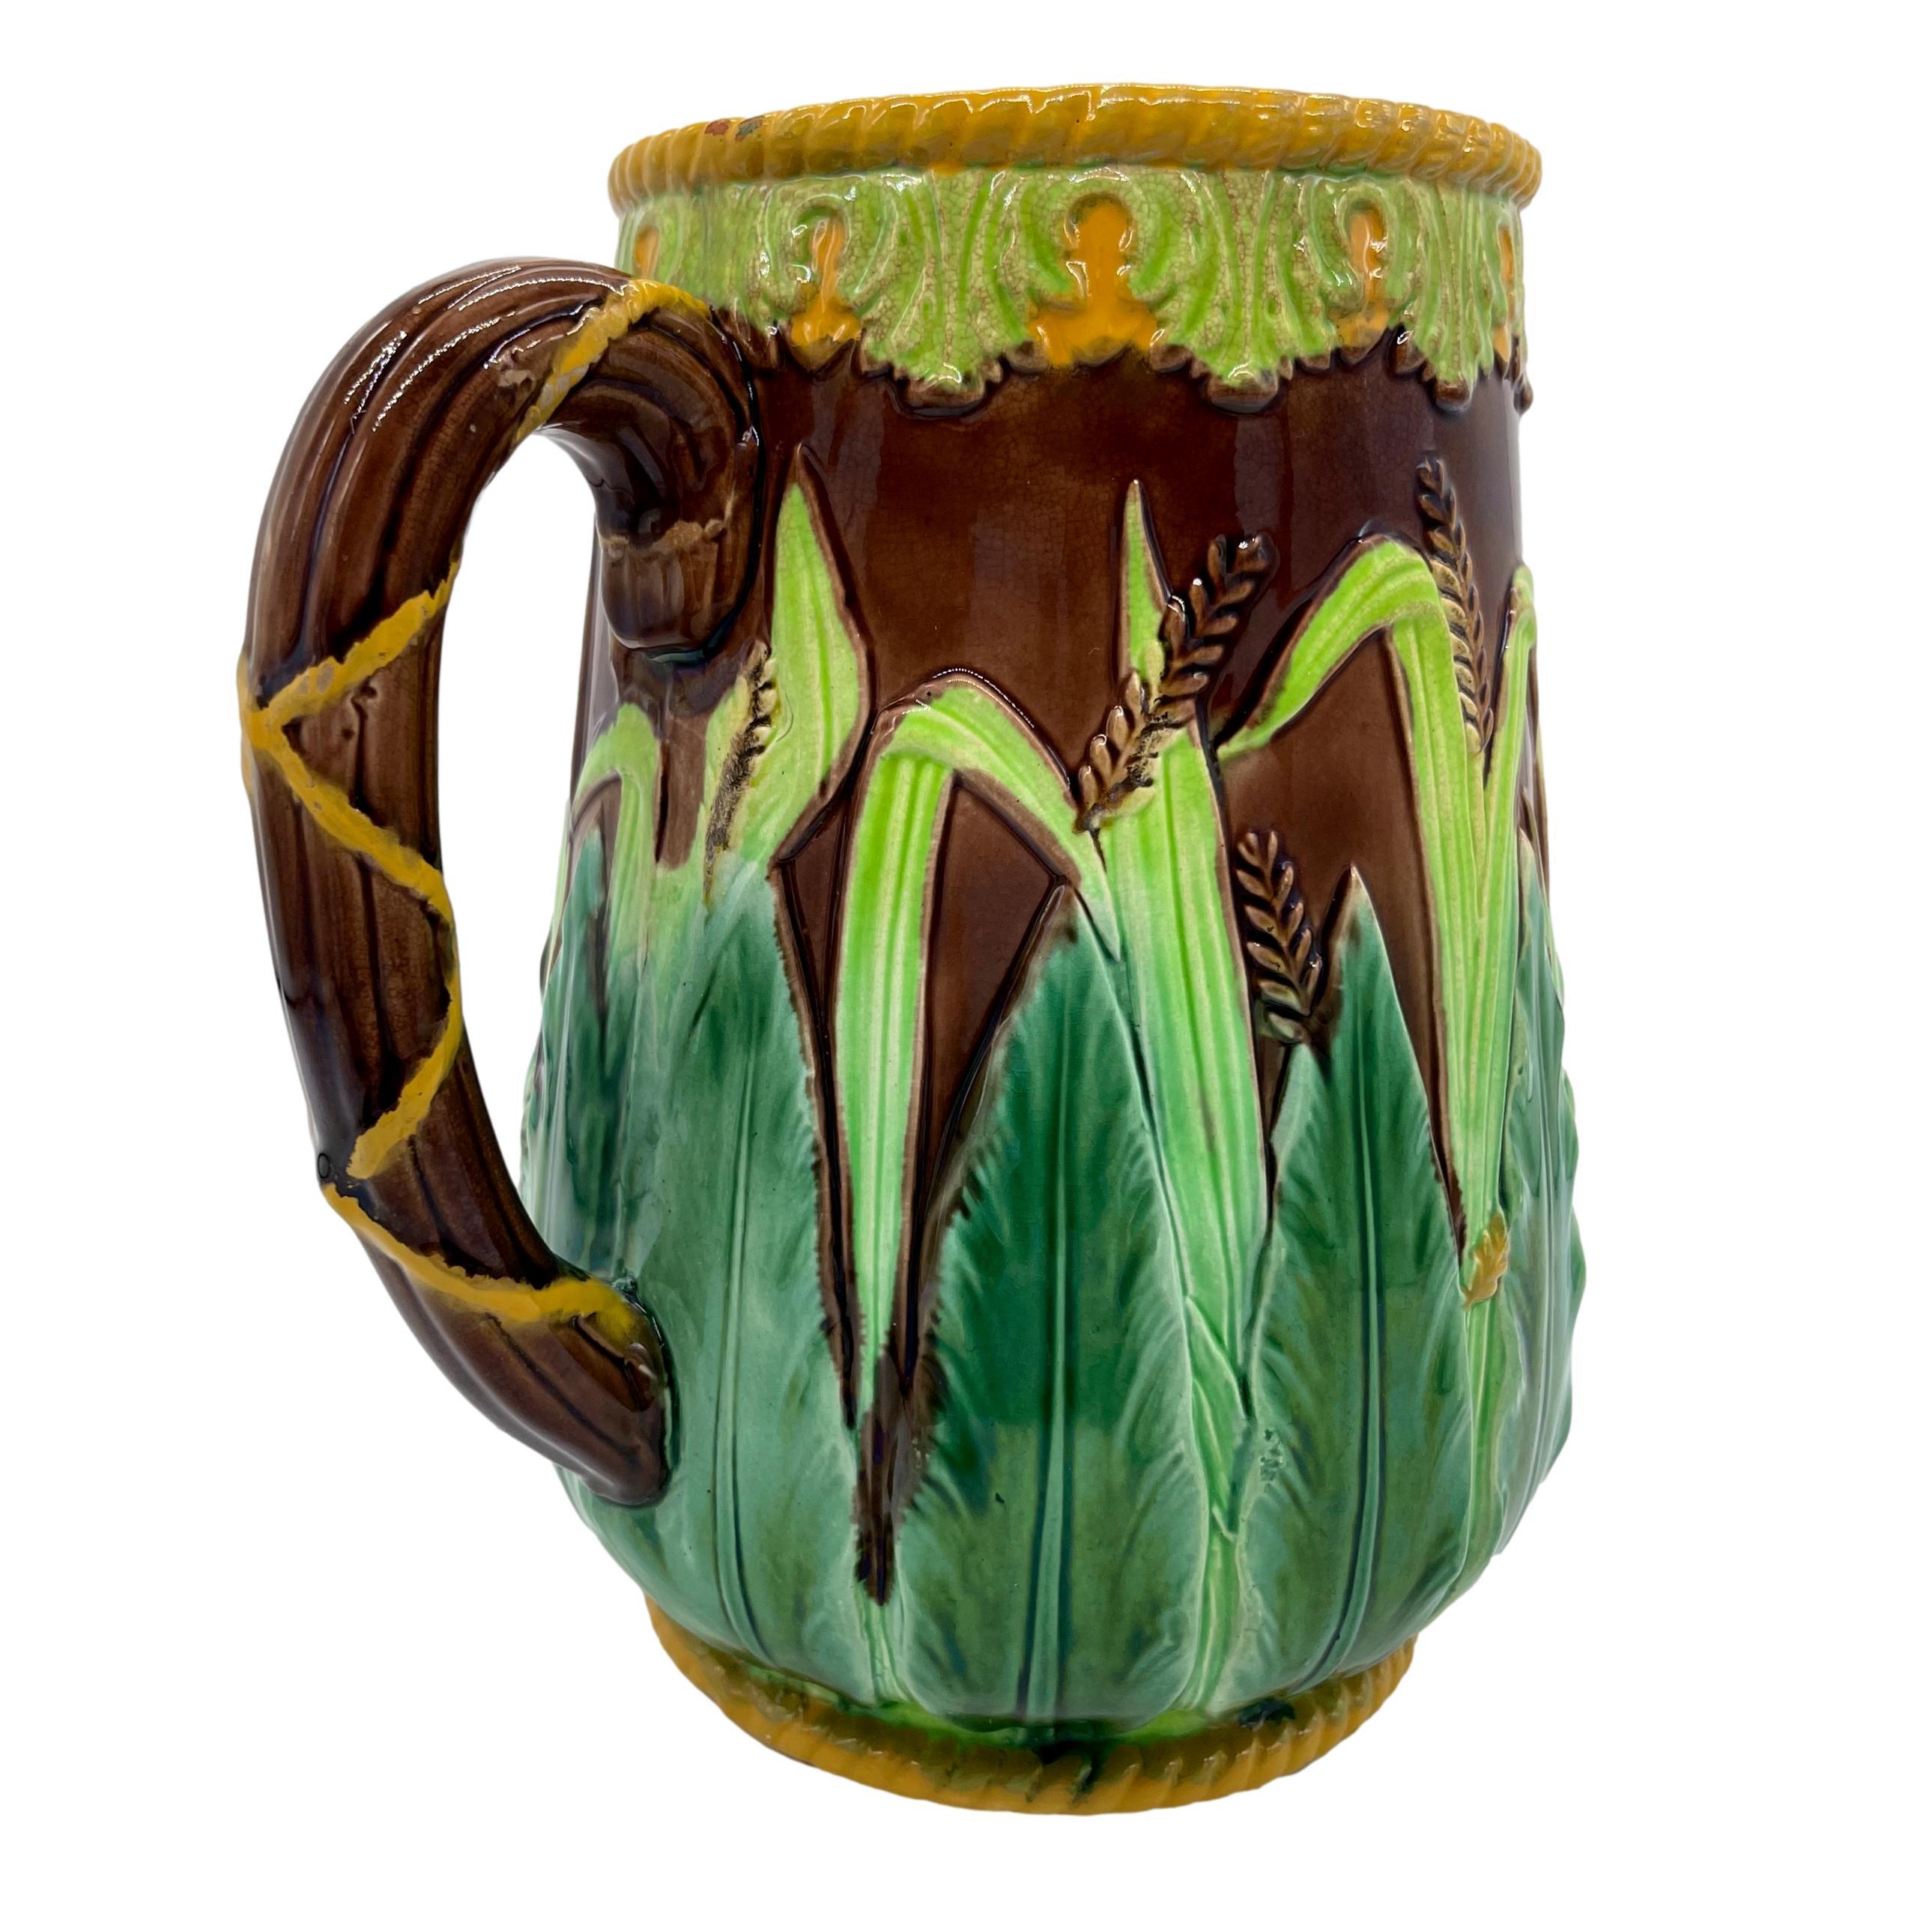 Molded Large George Jones Majolica Wheat Pitcher with Green Acanthus Leaves, ca. 1875